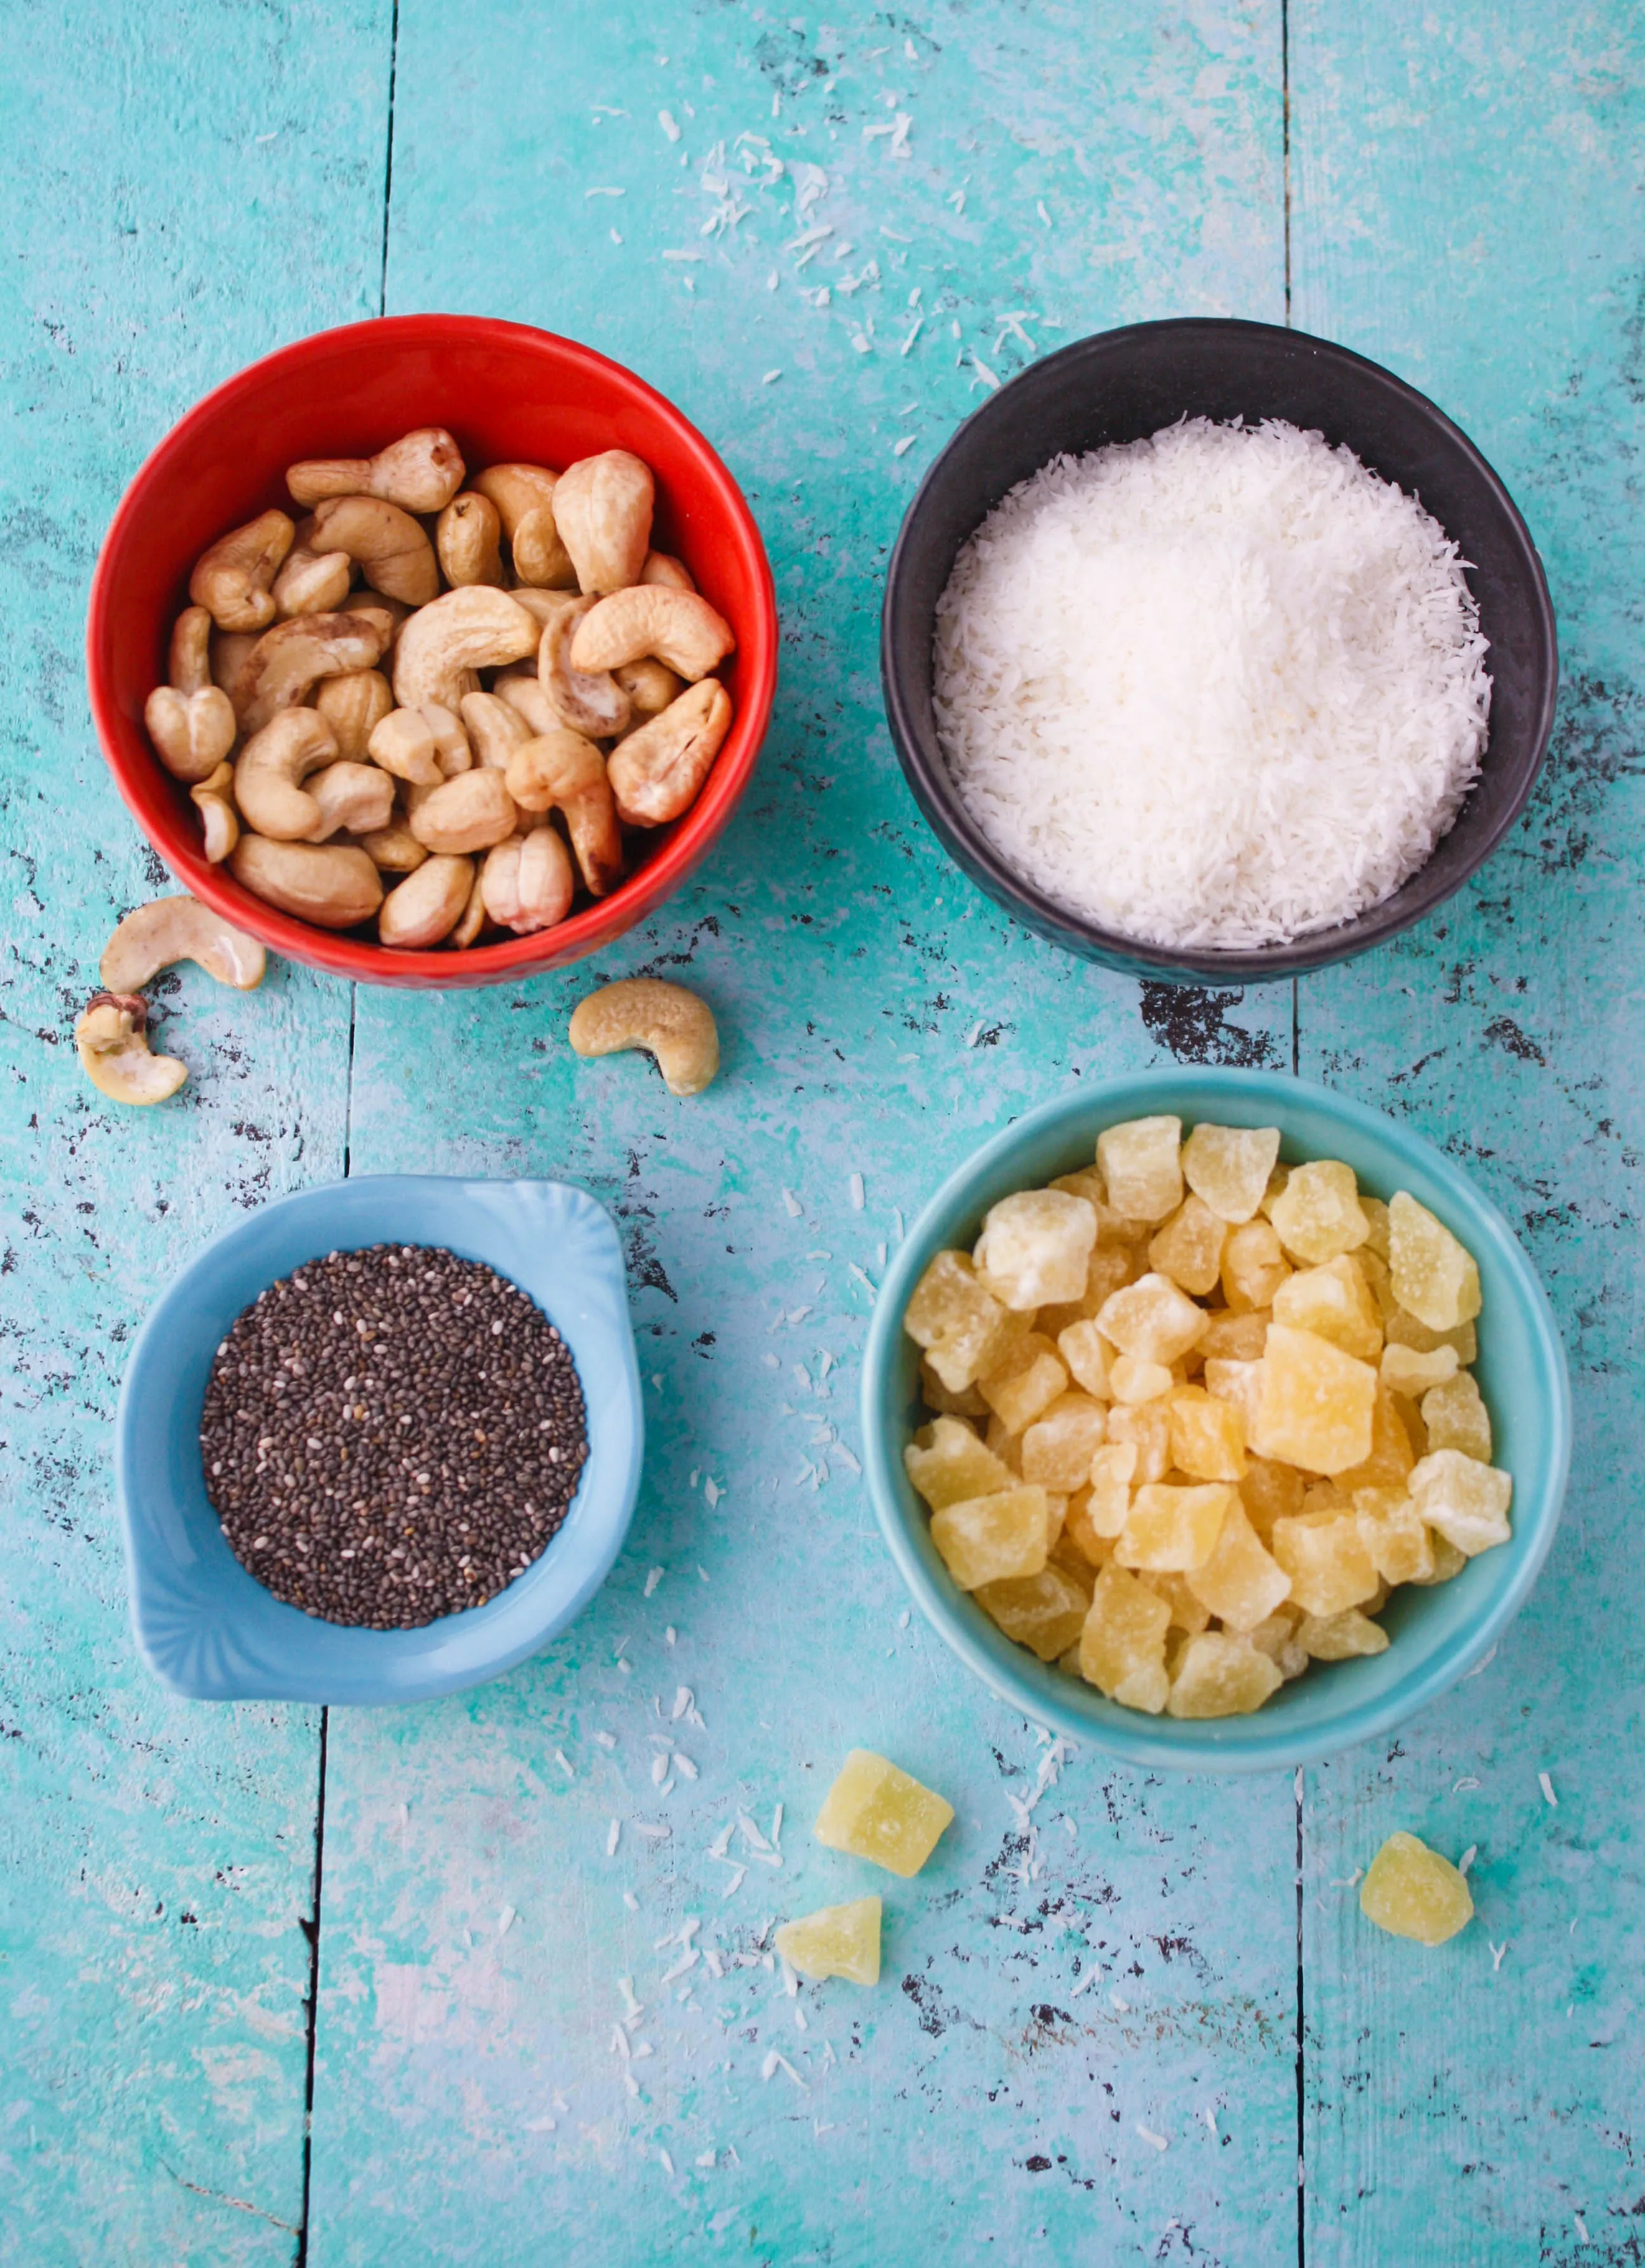 No bake coconut, cashew, and pineapple energy bites are fun and tasty for snacking! You'll love these no bake energy bites any time of day.